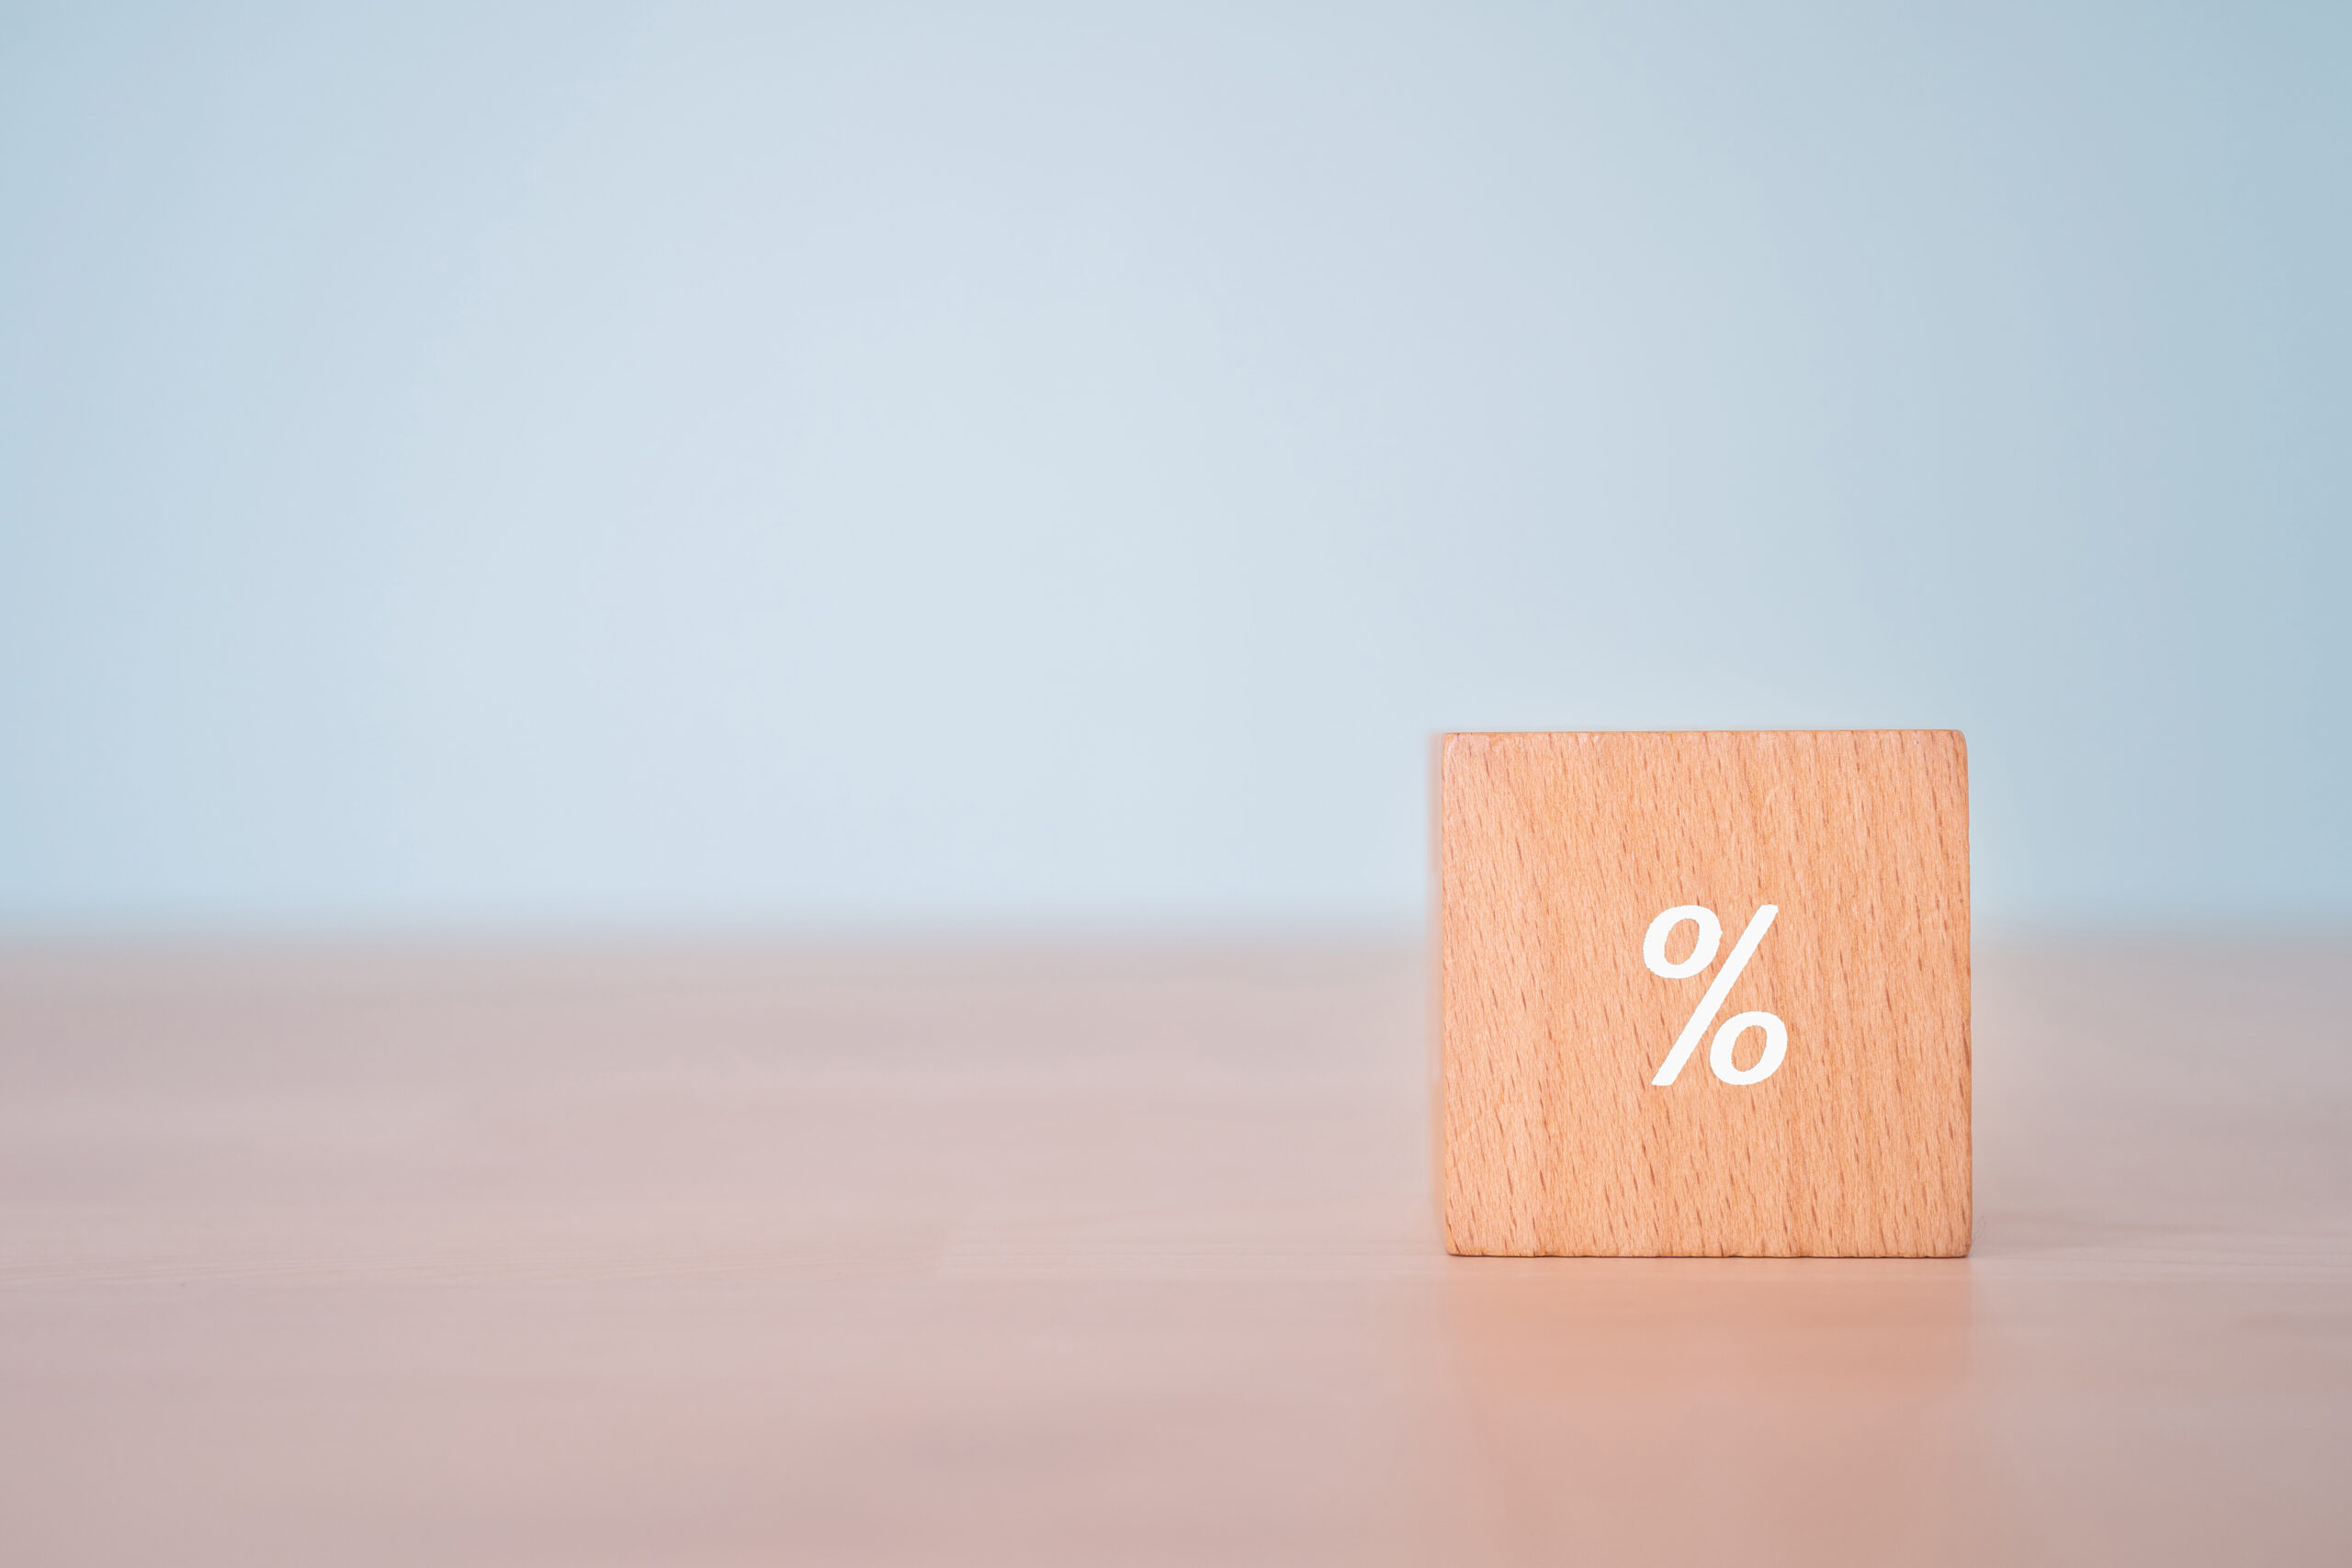 Wooden block with white percentage sign indicating interest rates on wooden table with blue background, economy